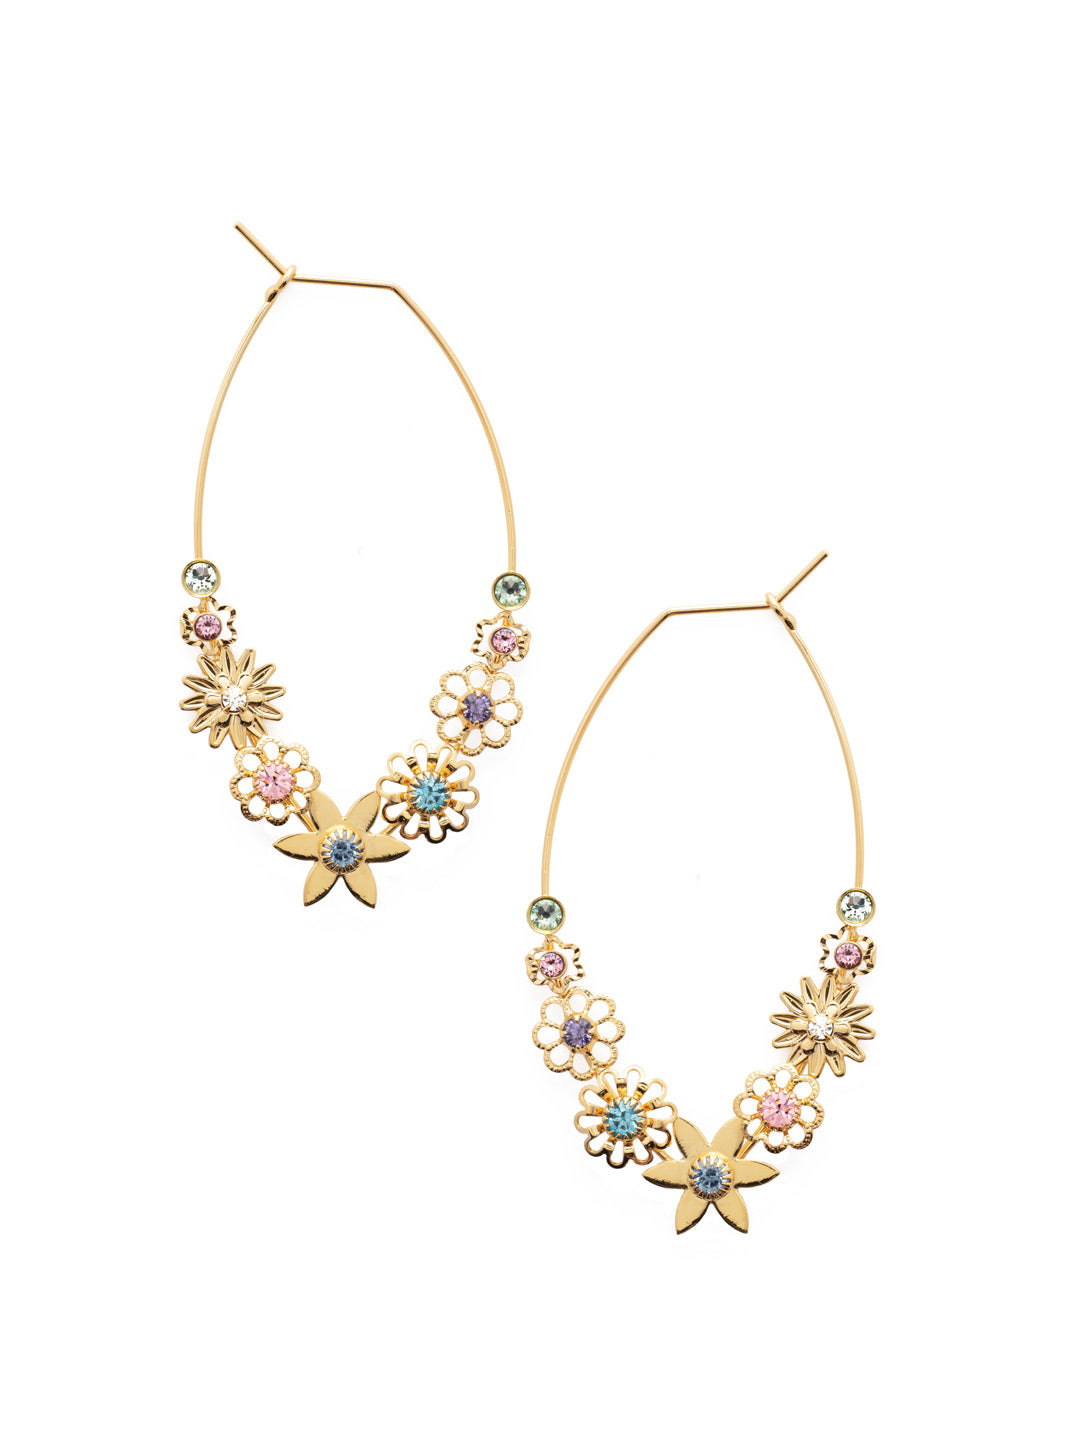 Fayette Hoop Earrings - EEV11BGSPR - <p>Our Fayette Hoop Earrings are floral metallic beauties accented with the Sorrelli crystal sparkle you know and love. From Sorrelli's Spring Rain collection in our Bright Gold-tone finish.</p>